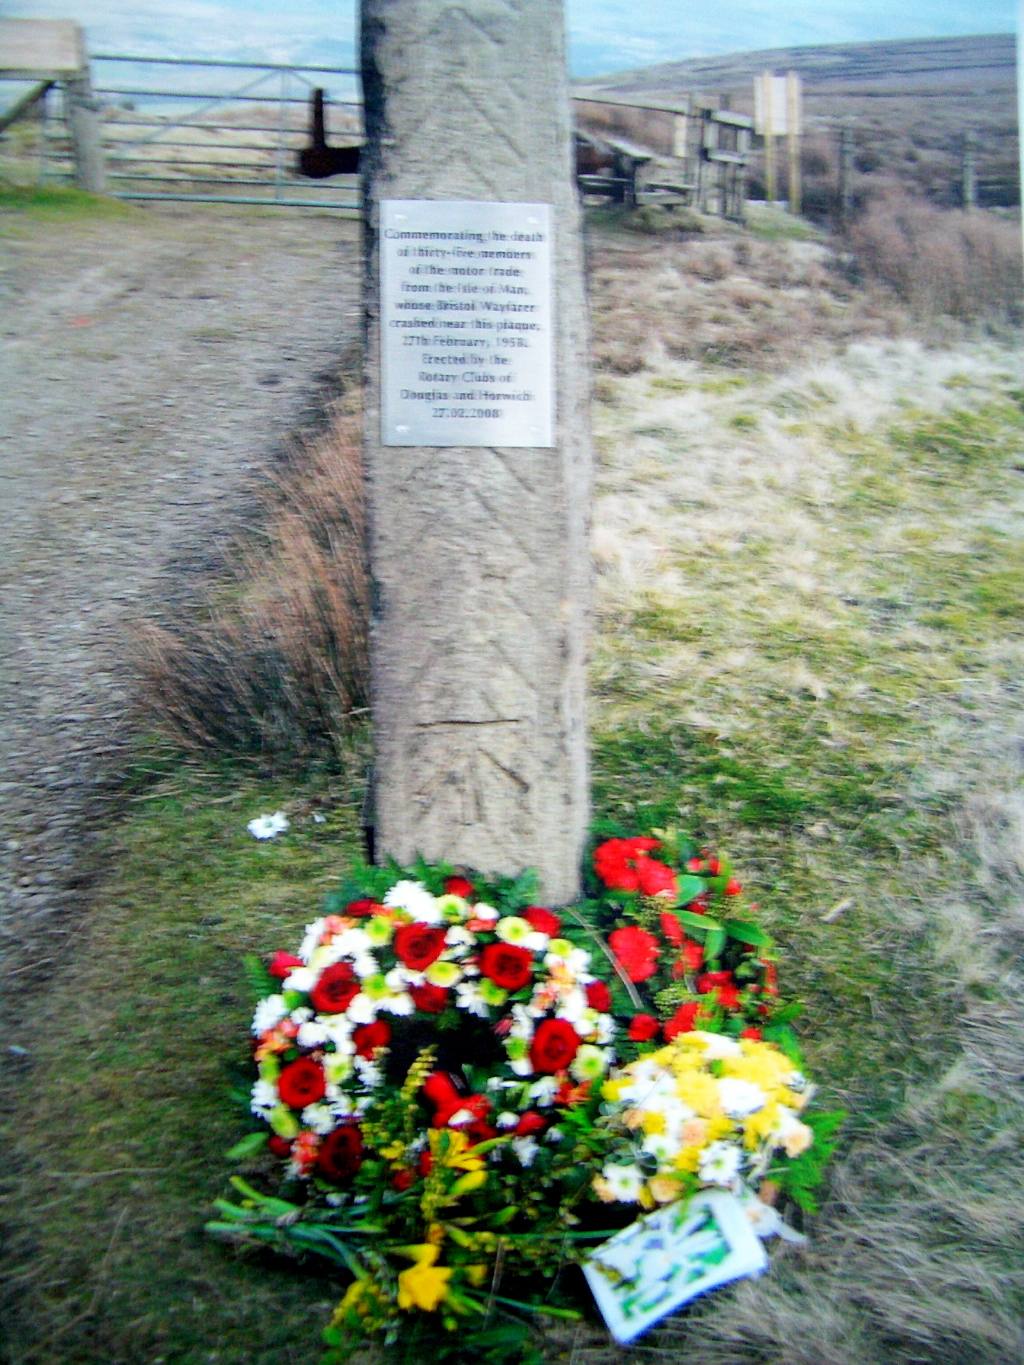 Horwich Charter Night 2008 - Flowers laid at base of pillar with plaque commemorating the 50th Anniversary of Winter Hill 25/2/08